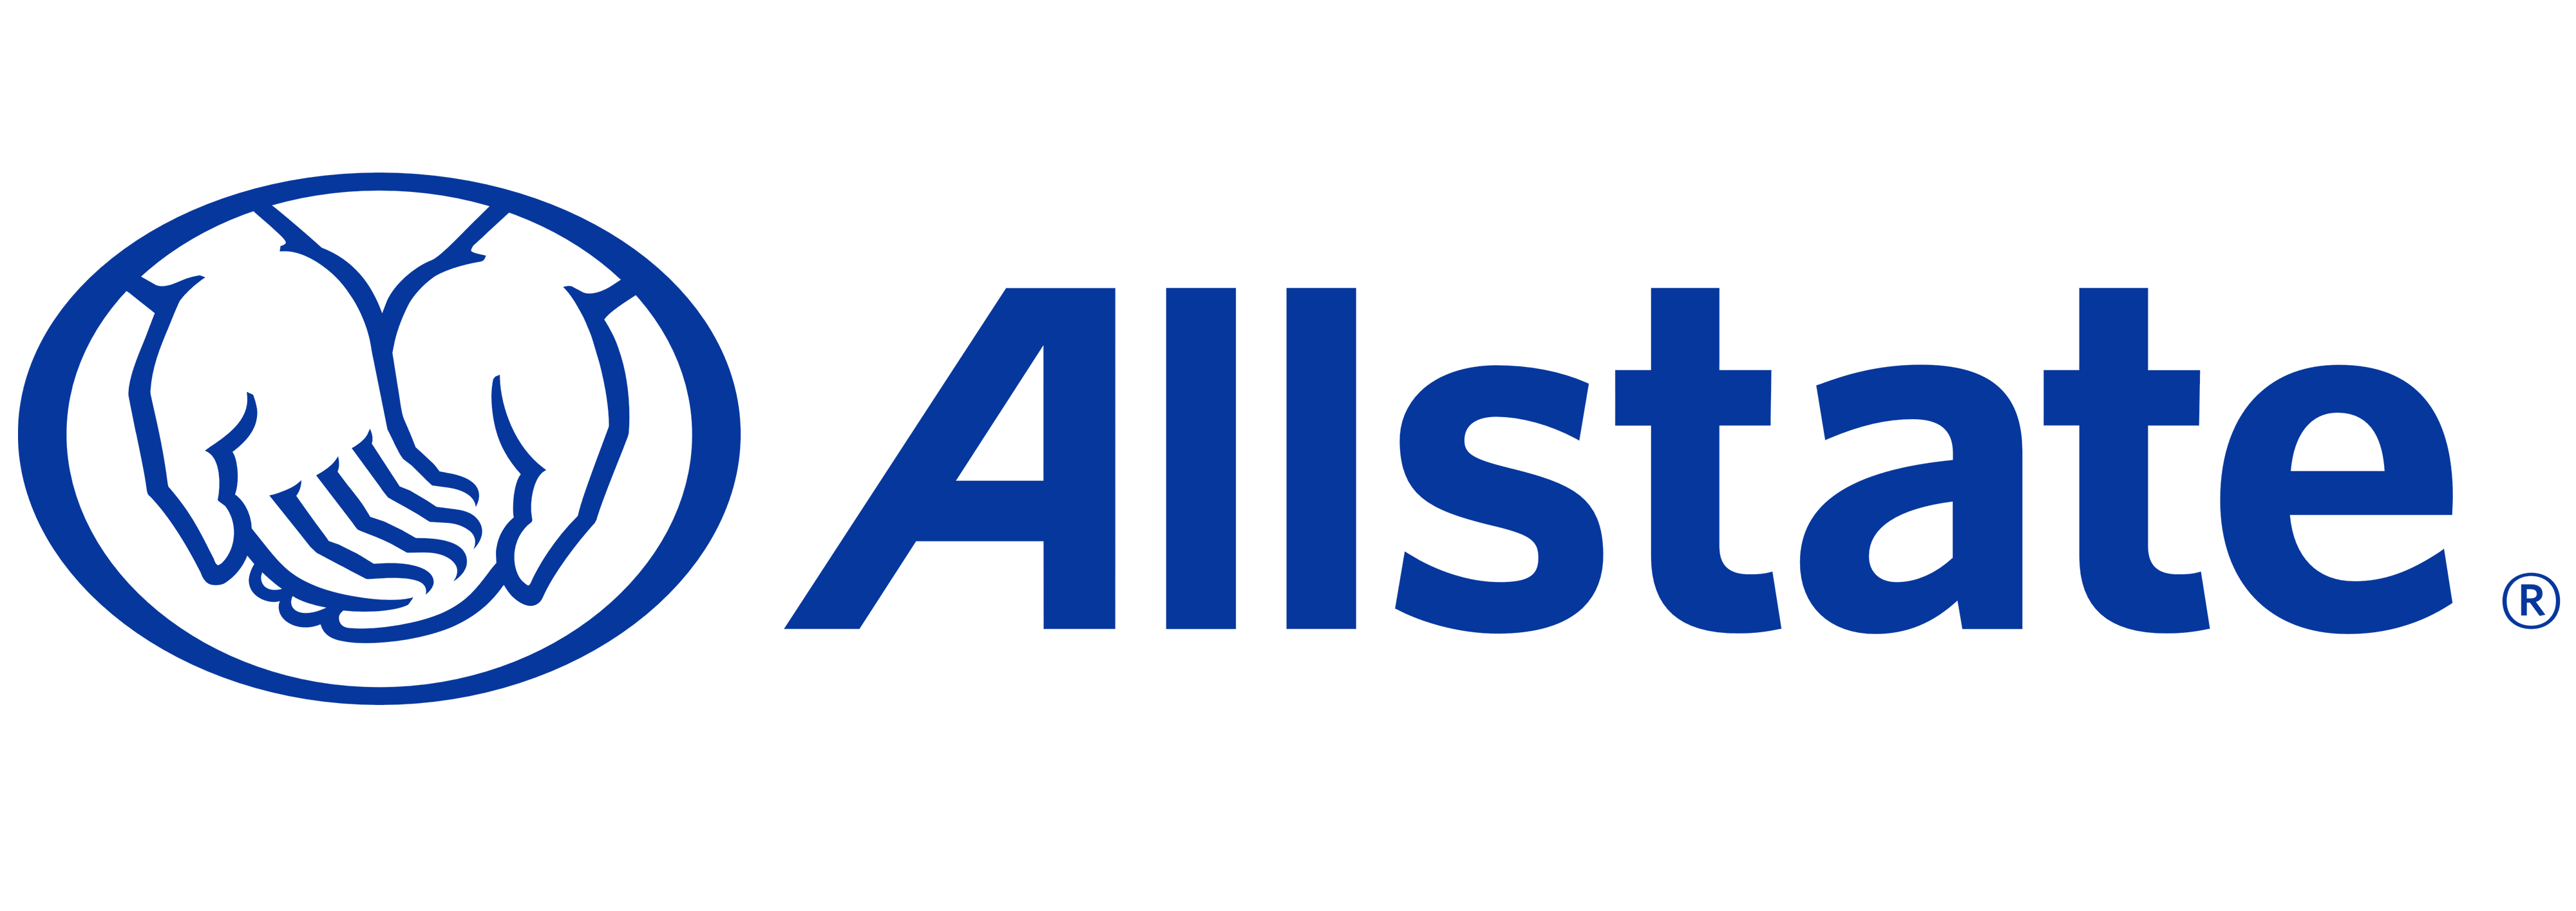 USPTO grants patent to Allstate for connected vehicle control system